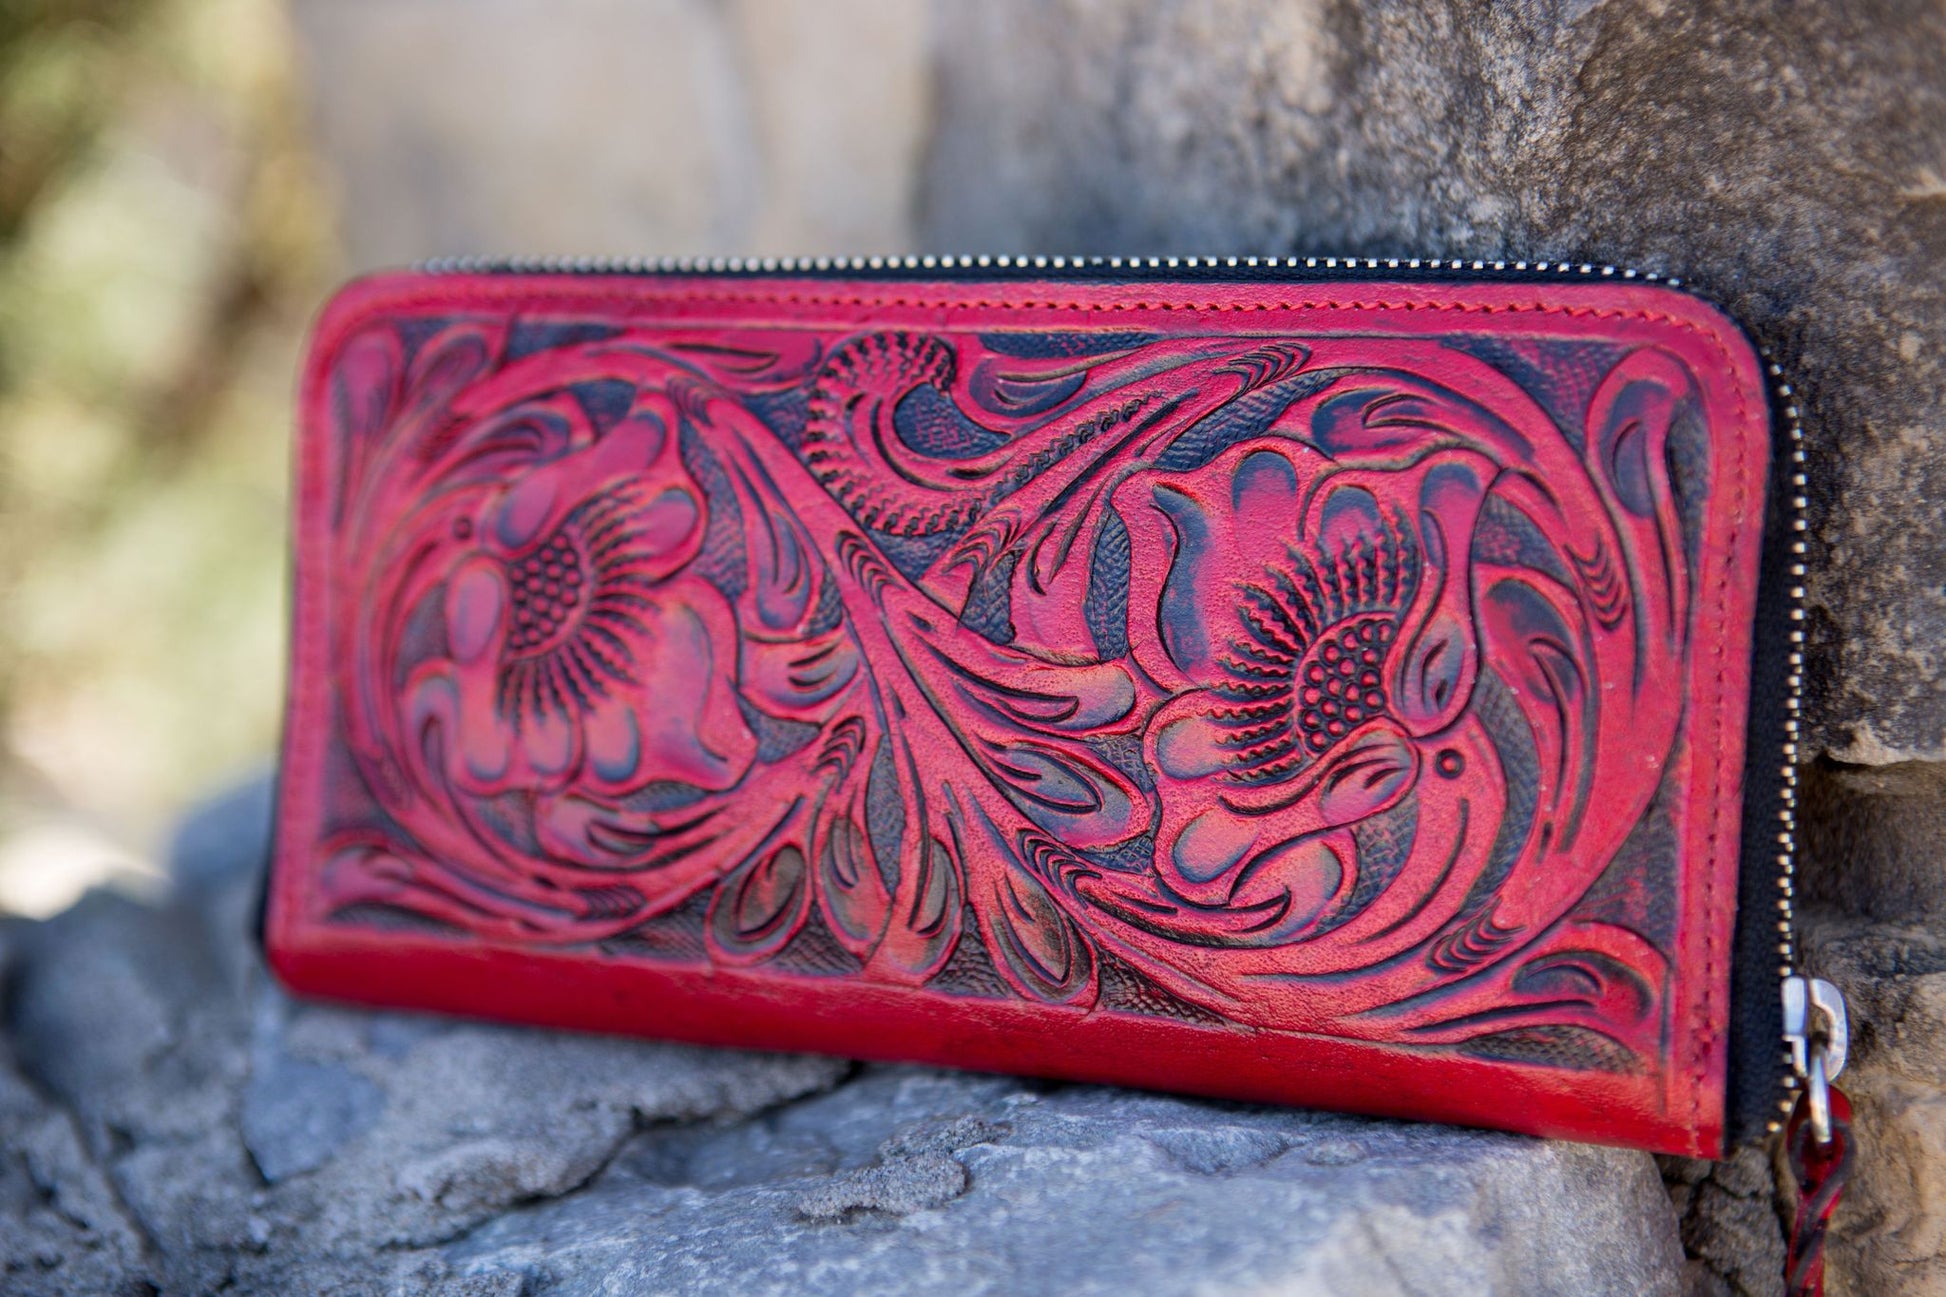 Tooled Leather Accordian Wallet - bag, clutch, cowgirl, floral, floralleather, leather, made in the usa, madeintheusa, MADEINUSA, madeinusajewelry, Printed in USA, purse, southwestern, tooled, tooledleather, turquoise, usa, usa artisan, usa artist, usa made, usaartisan, usaartist, USAMADE, usamadejewelry, usaratisan, usartisan, wallet, western -  - Baha Ranch Western Wear